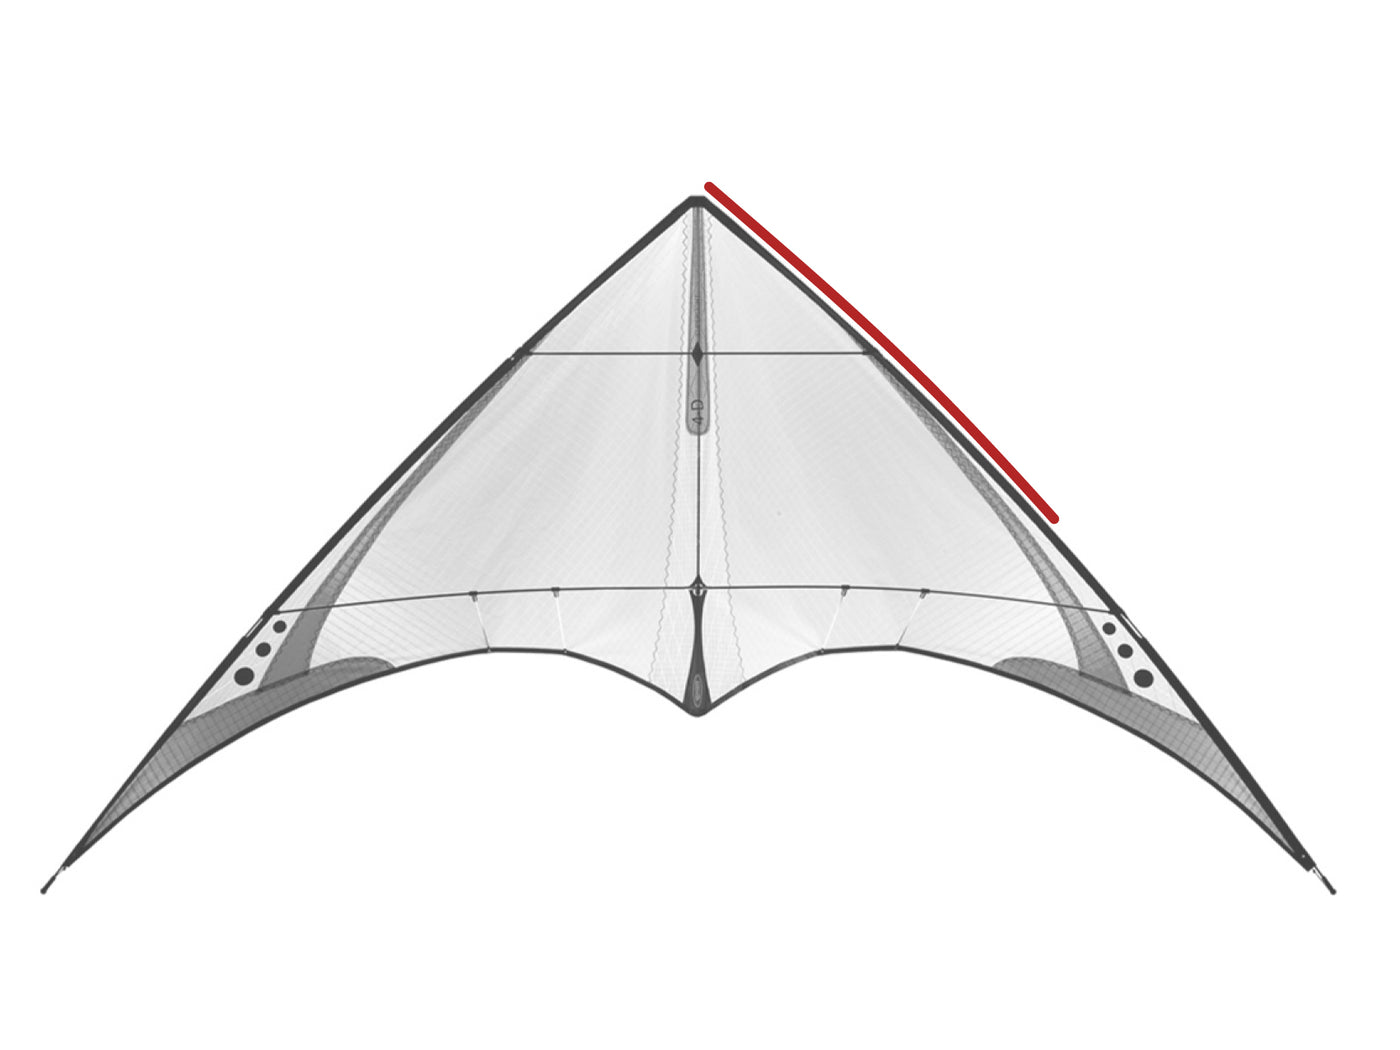 Diagram showing location of the 4-D Upper Leading Edge on the kite.